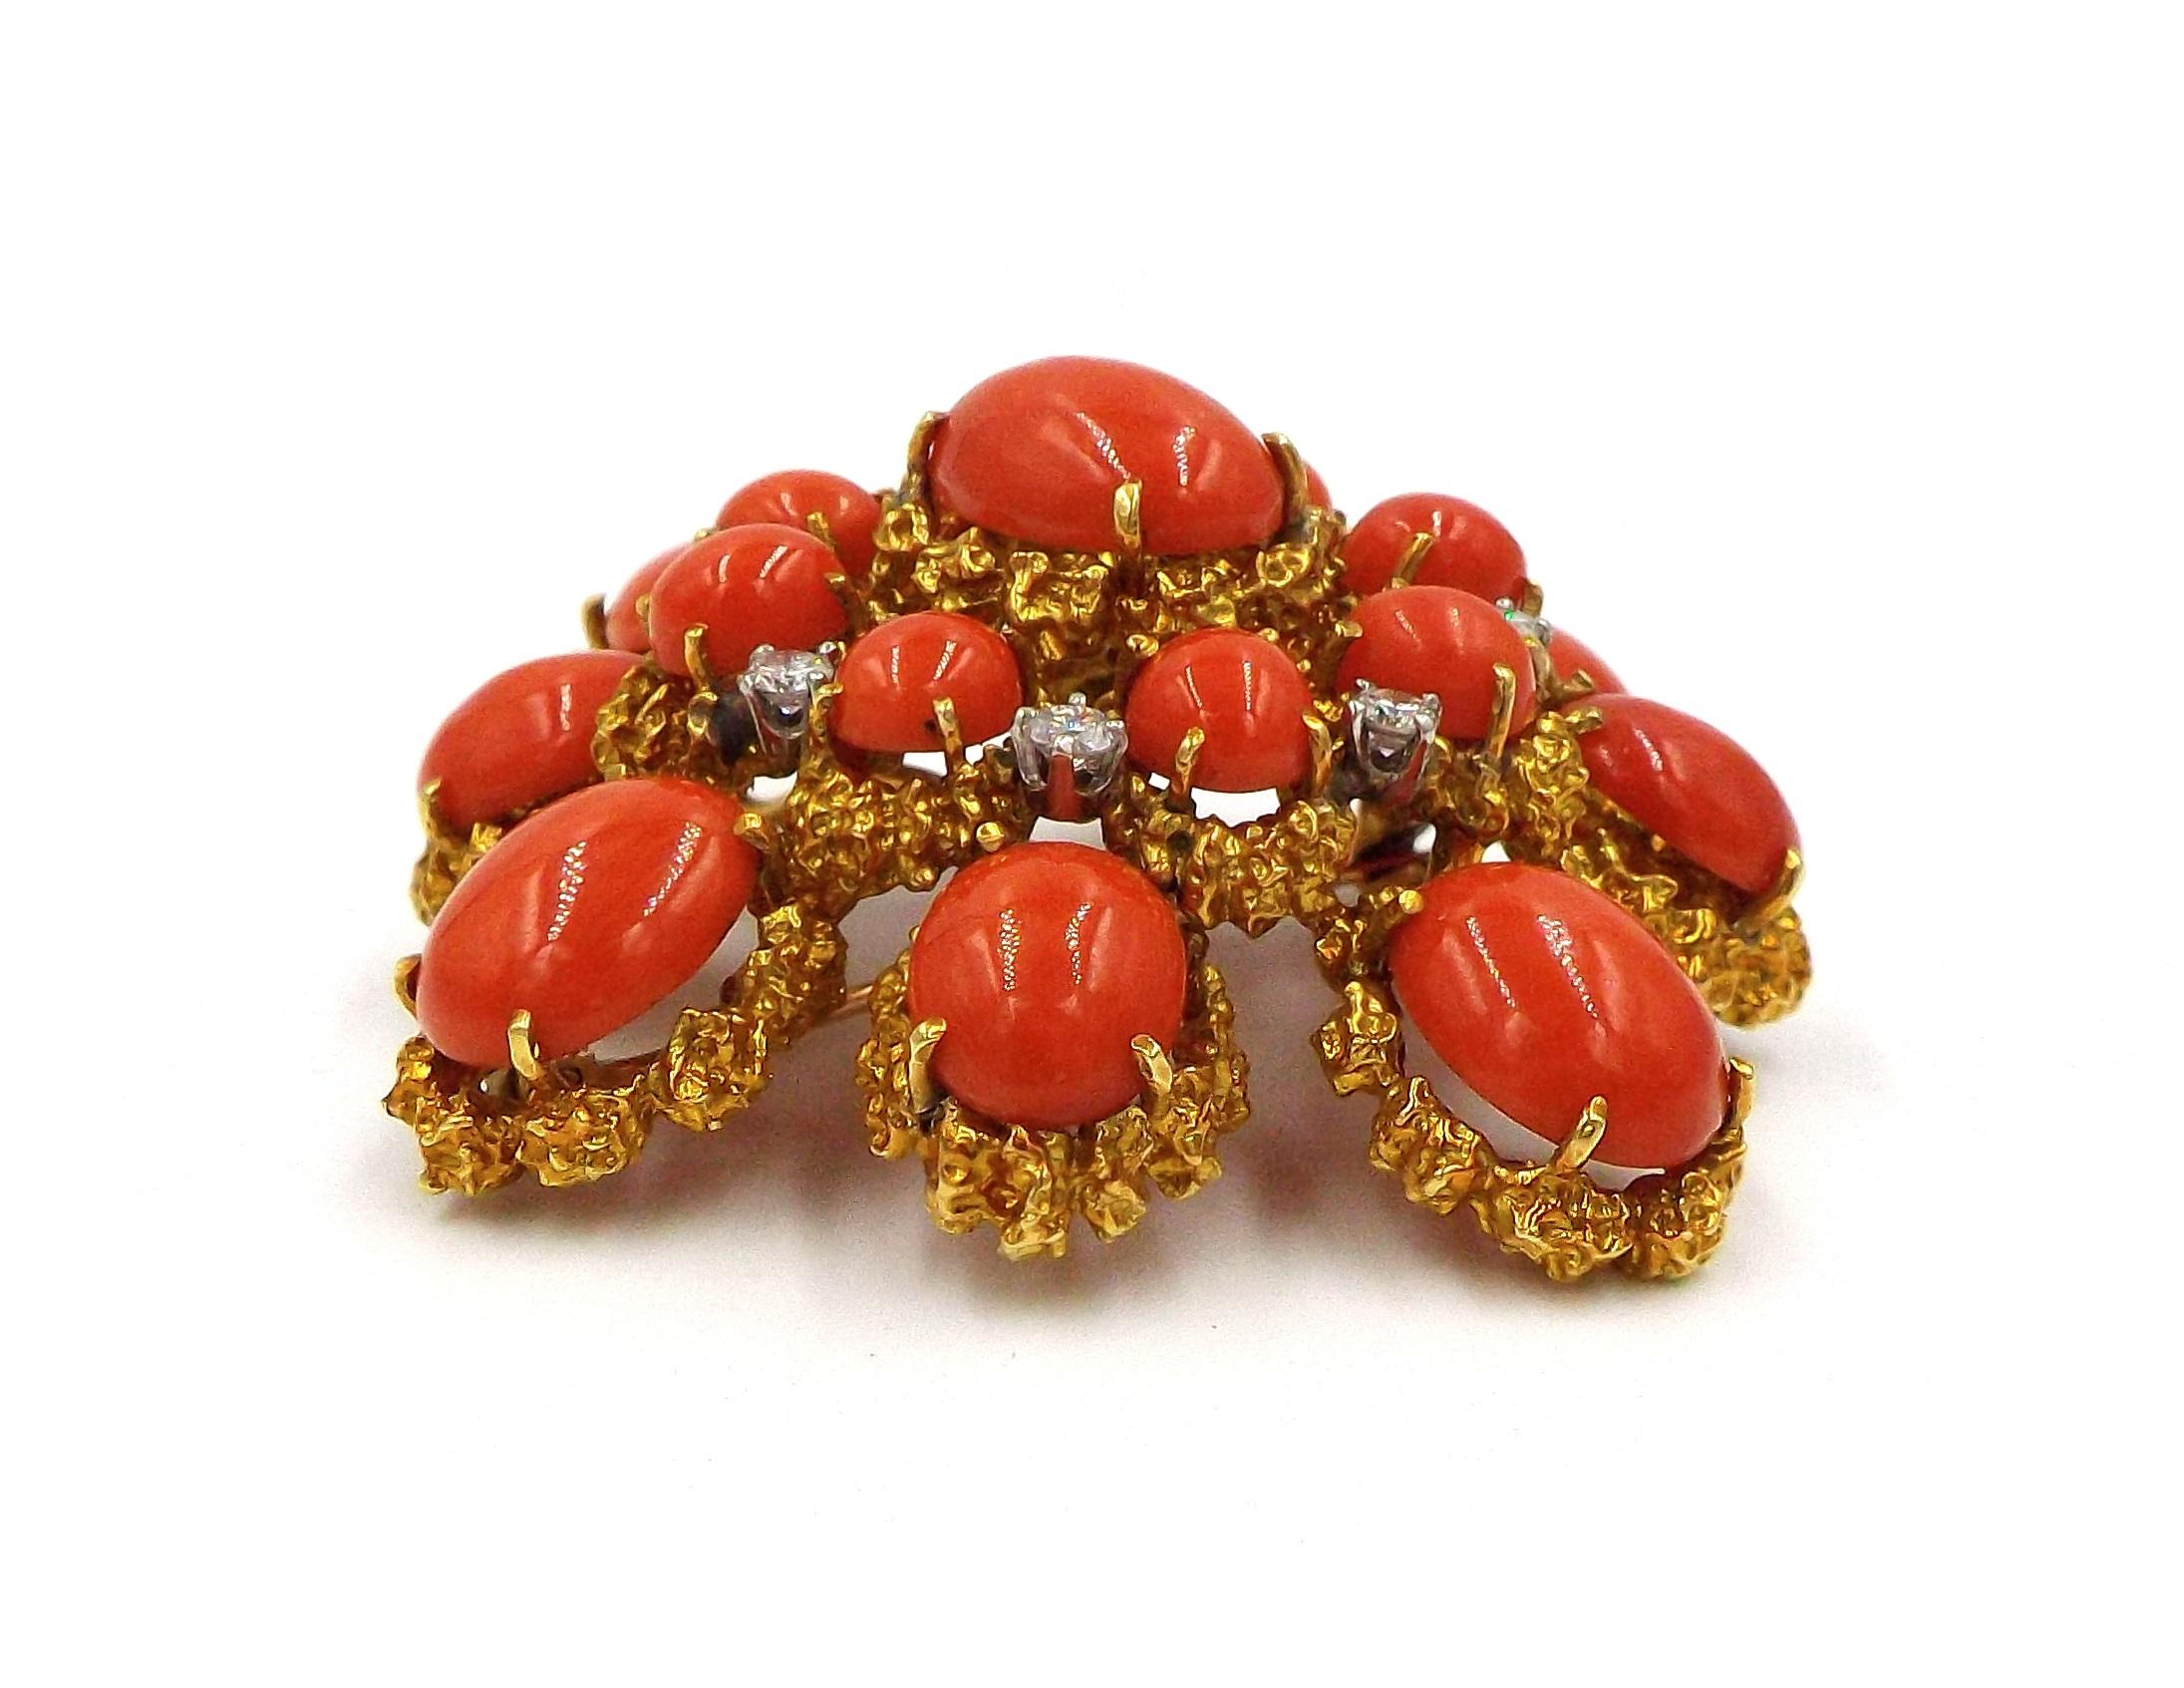 Set with oval coral cabochons and round diamonds within a textured gold mounting
METAL: 18k yellow gold
DIAMONDS: 8 round diamonds with approximate total weight of 0.5 carat
STONES: 17 oval coral cabochons
SIZE/DIMENSIONS: 6.0 x 5.5 cm
GROSS WEIGHT: